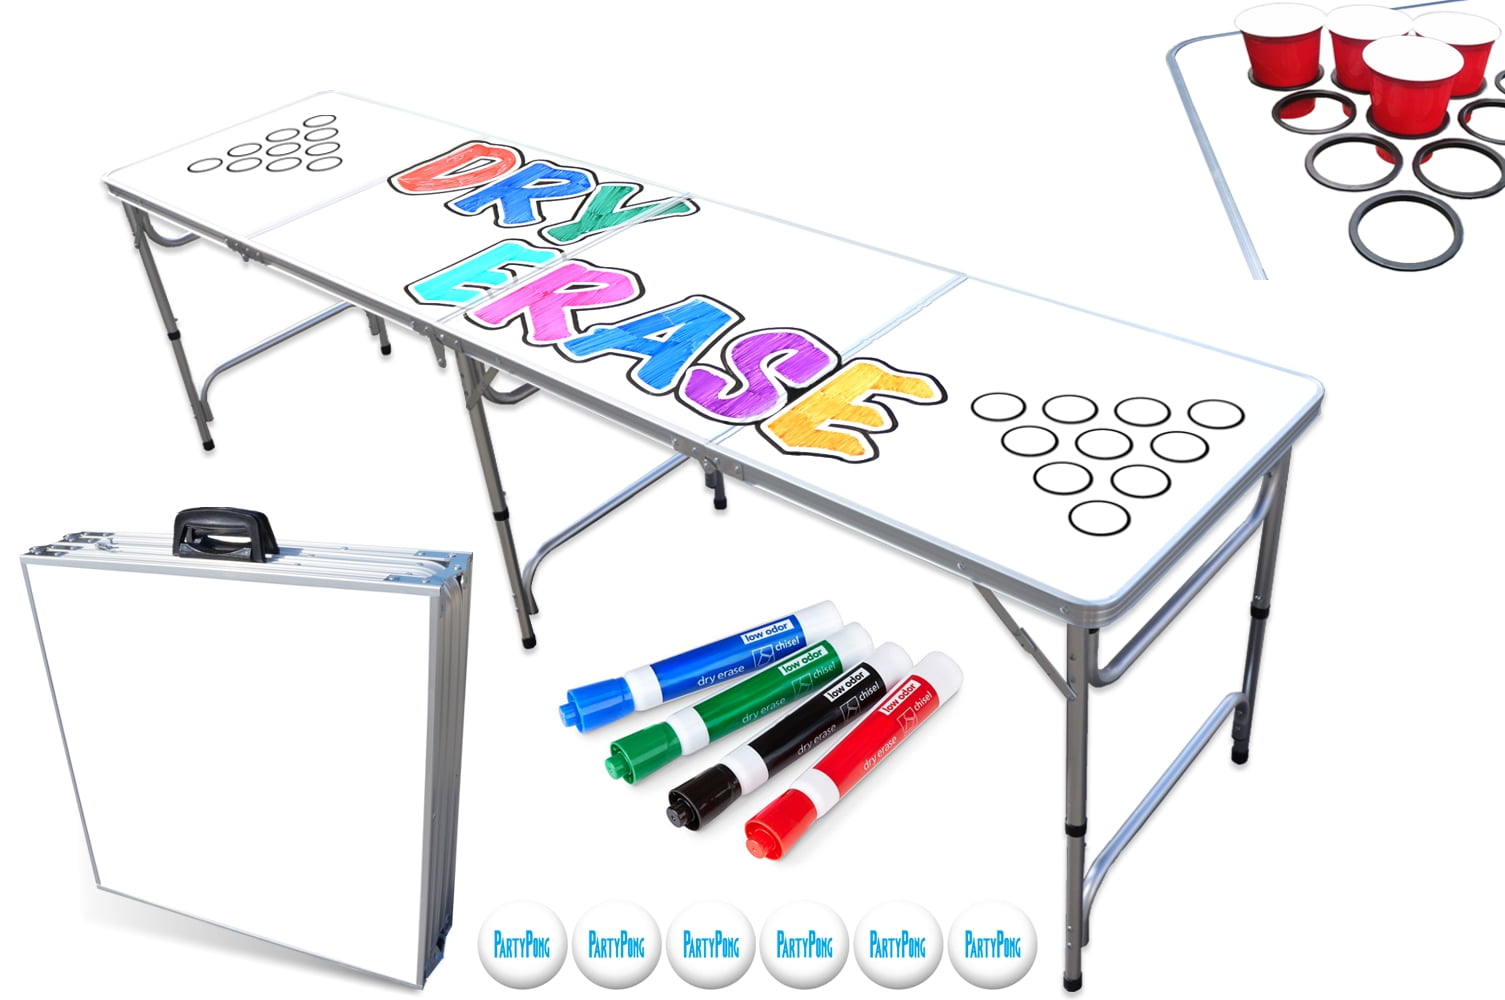 Dry Erase Surface & Graphic Choose Your Table Model PartyPongTables.com 8-foot PartyPong Pong Table Choose Cup Holes LED Lights 